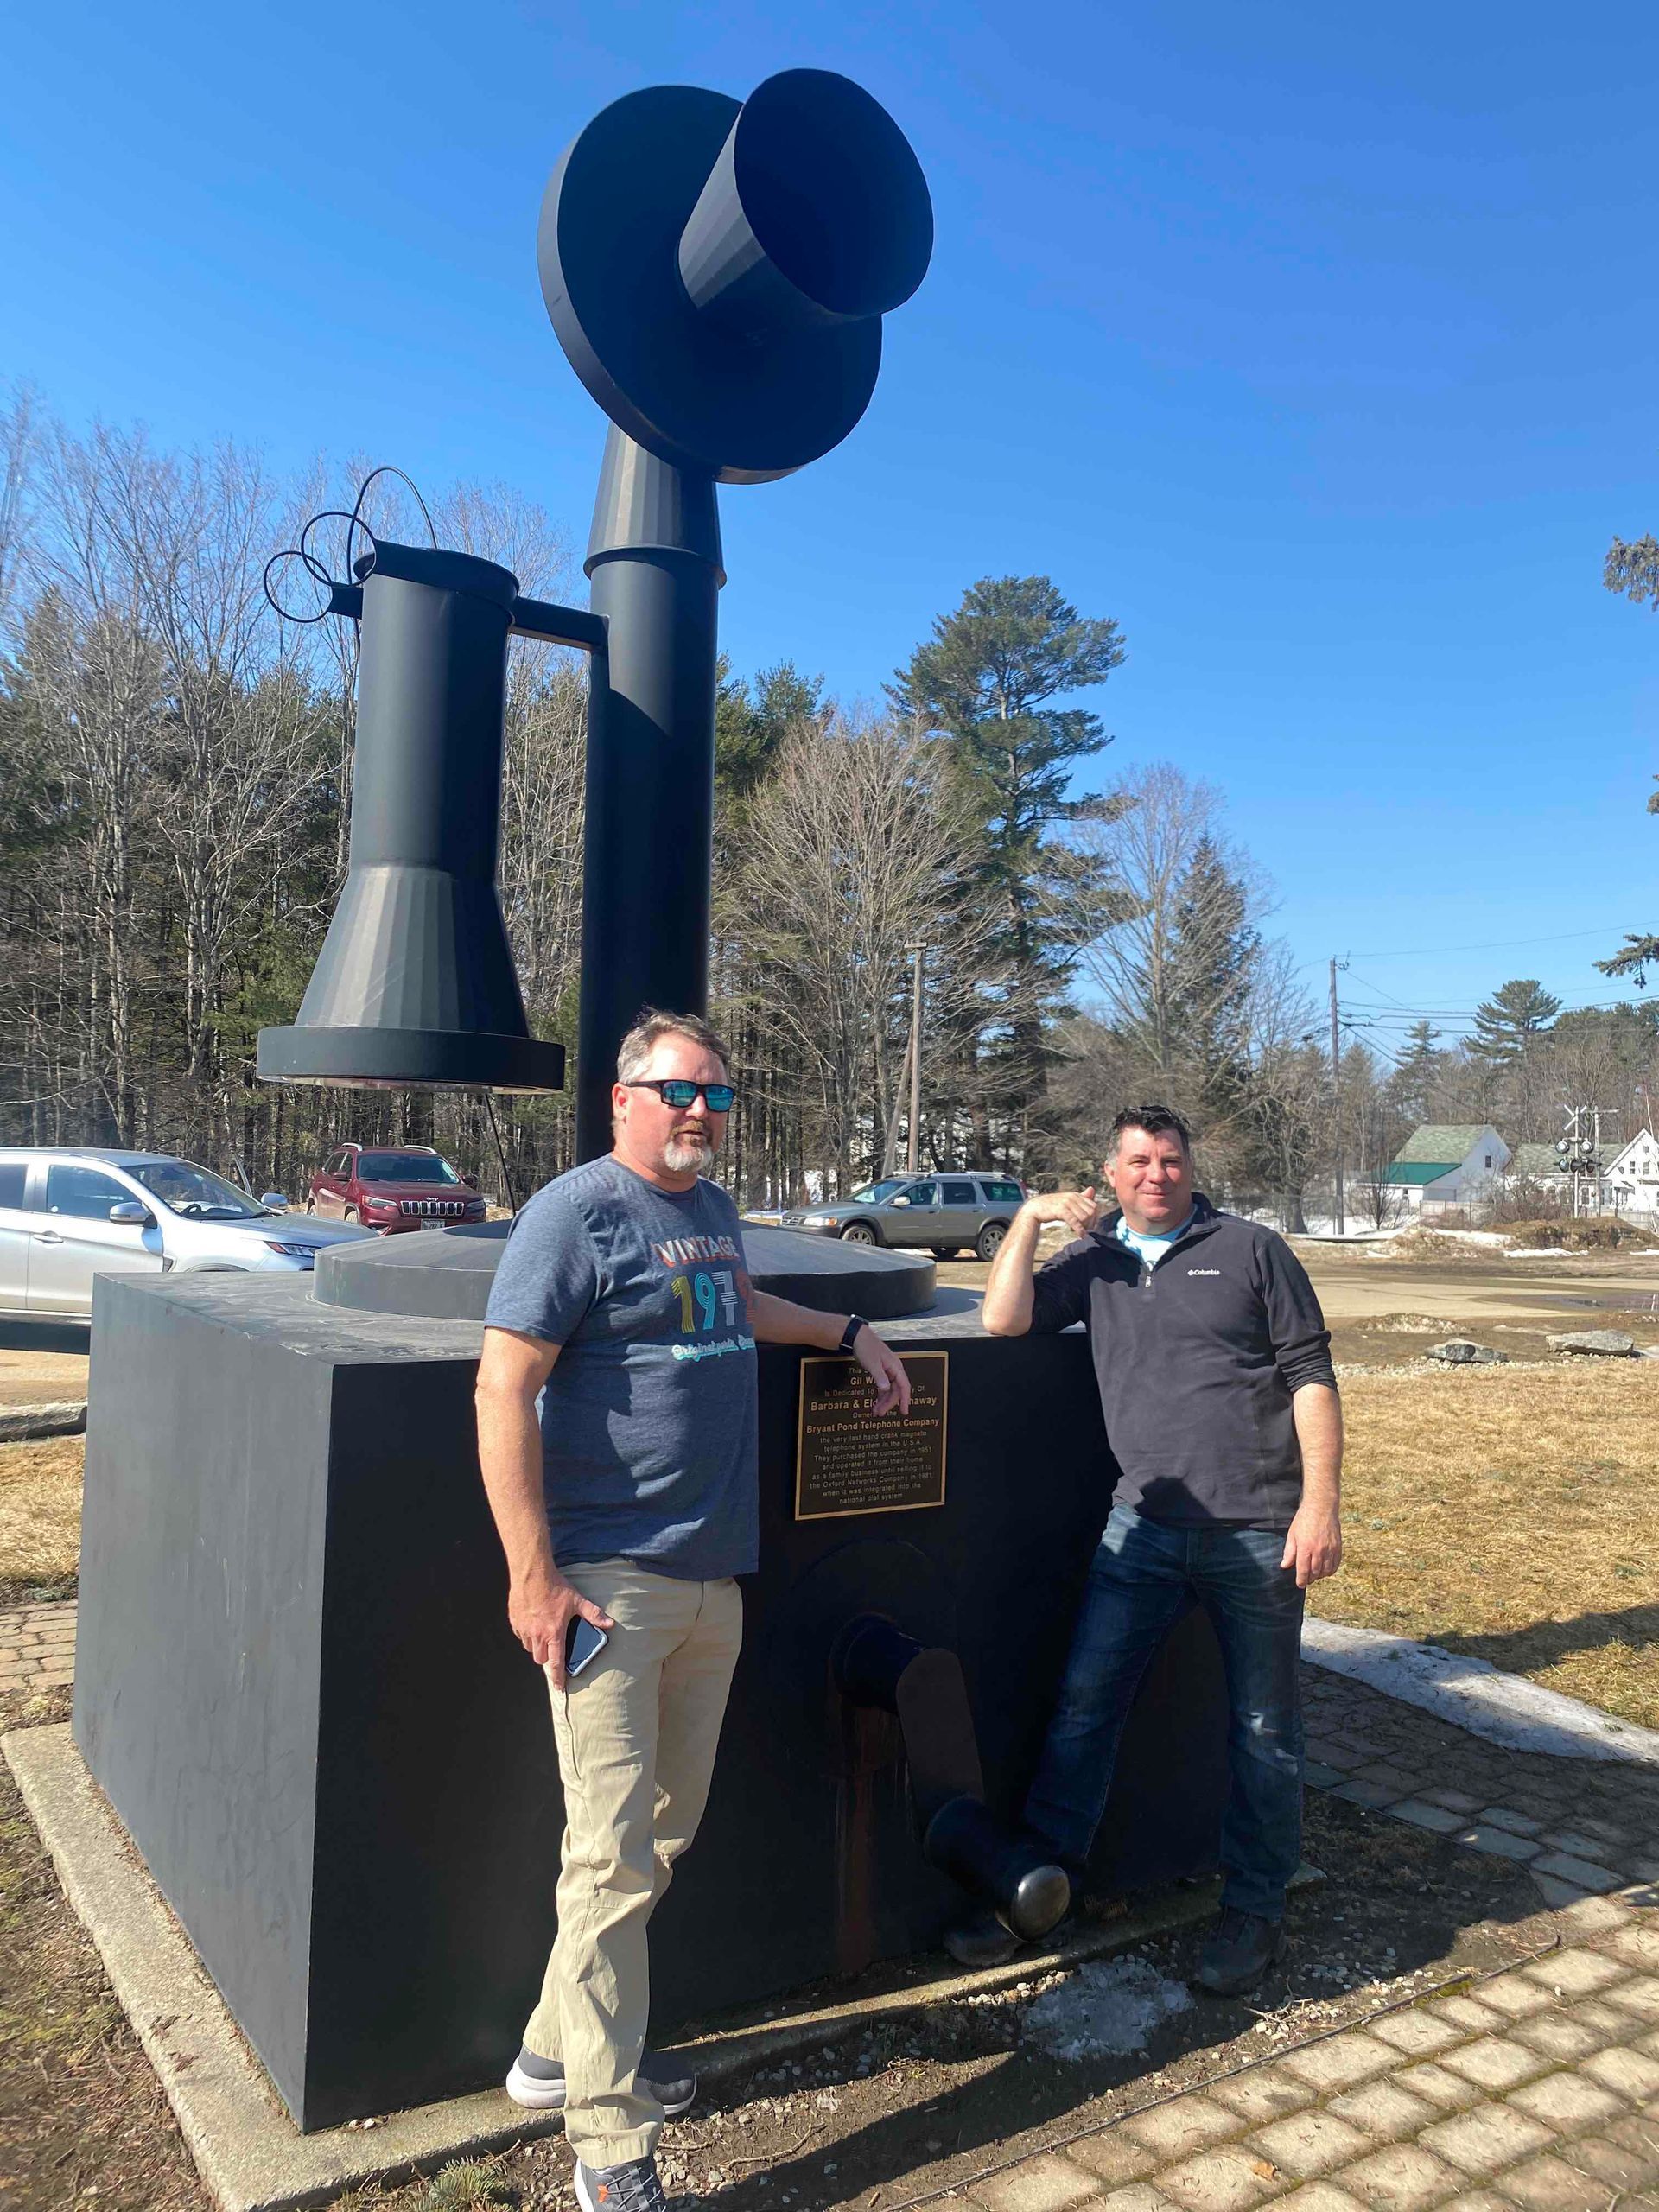 
World's Largest Hand Cranked Phone Monument, world record in Bryant Pond, Maine